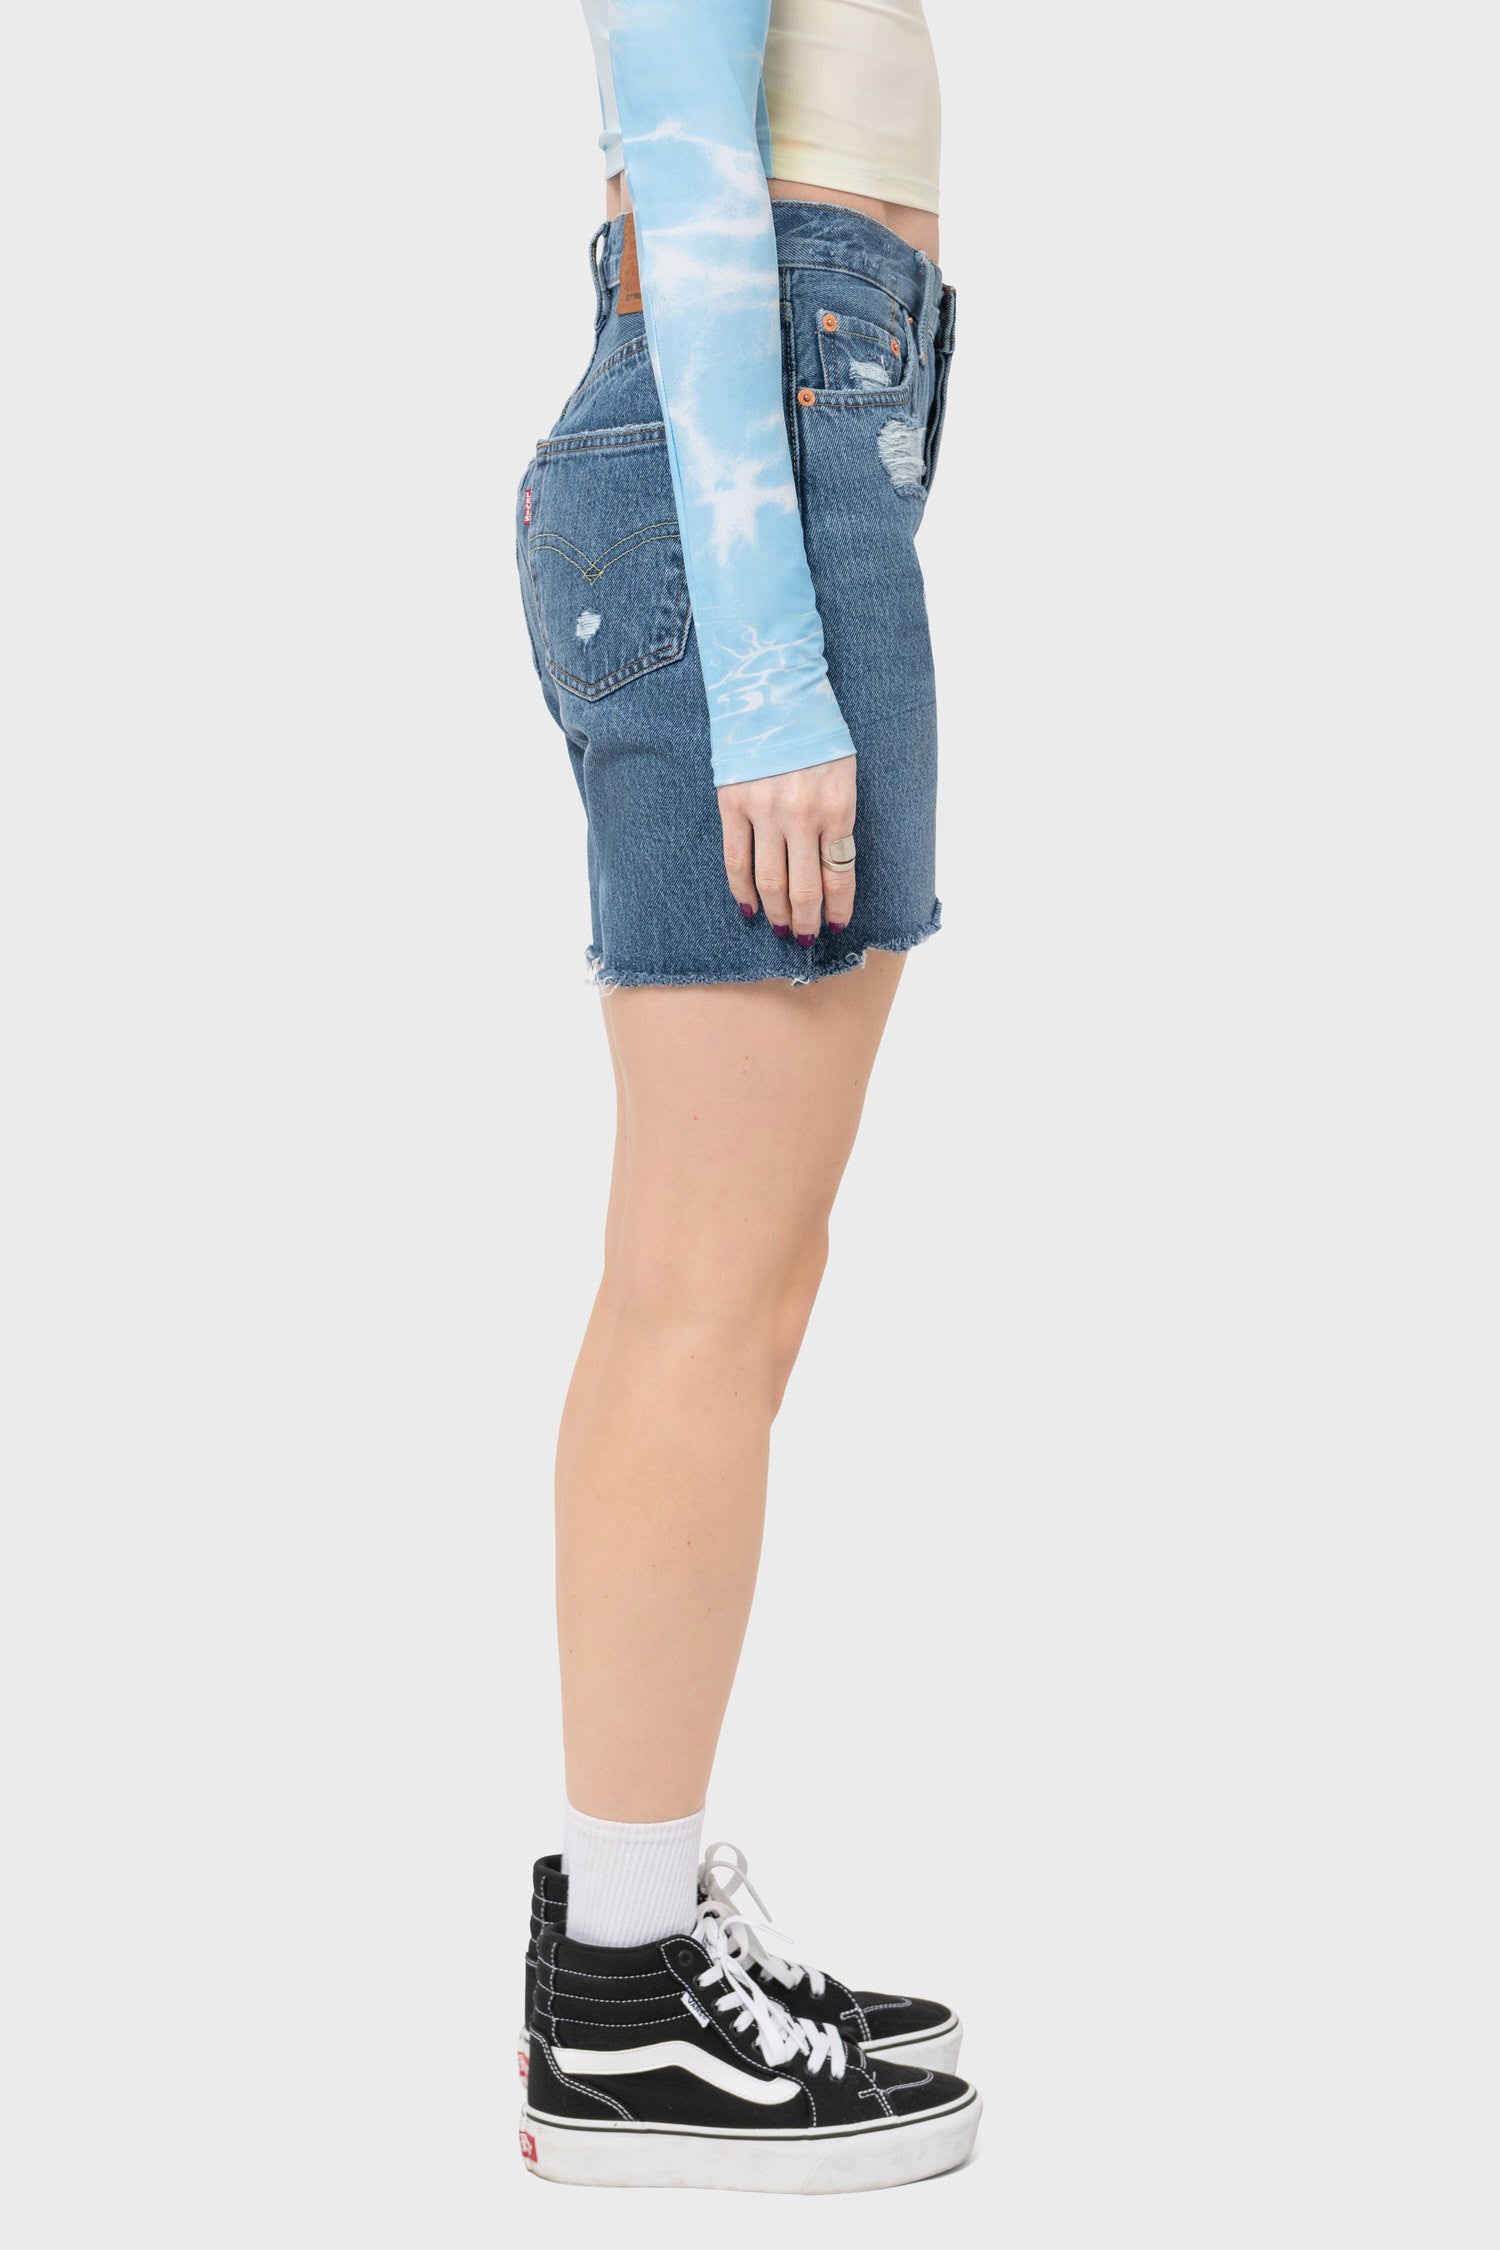 Women's Levi's 501 '90s Short in Pedal Time